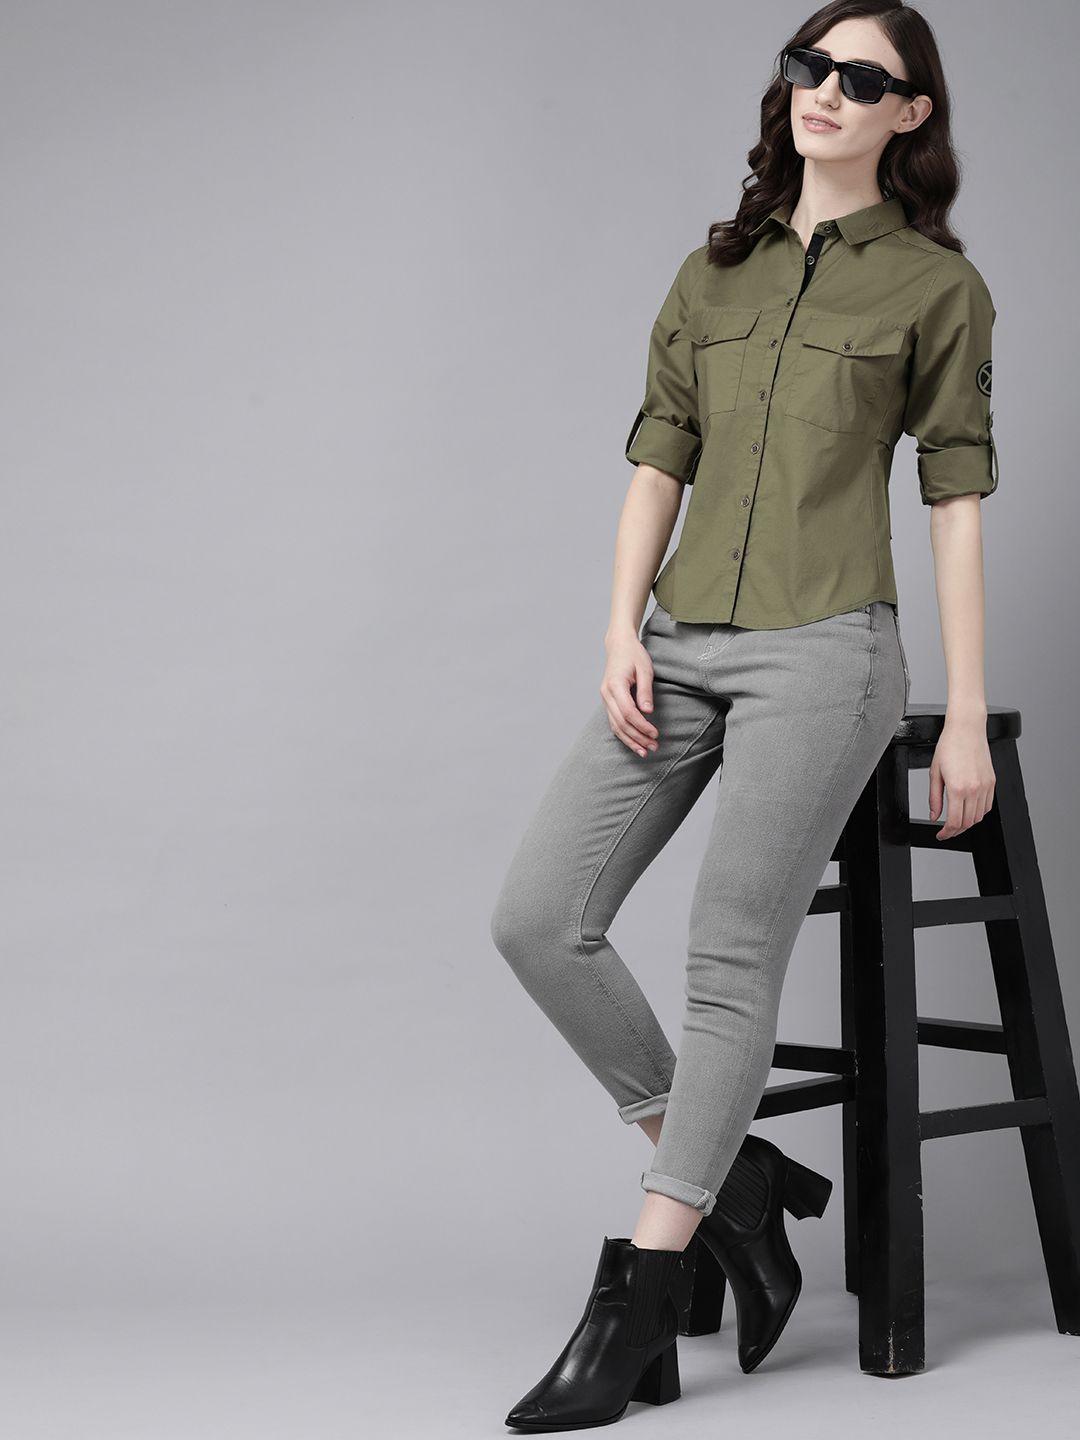 the roadster lifestyle co. women olive green solid stretchable casual shirt